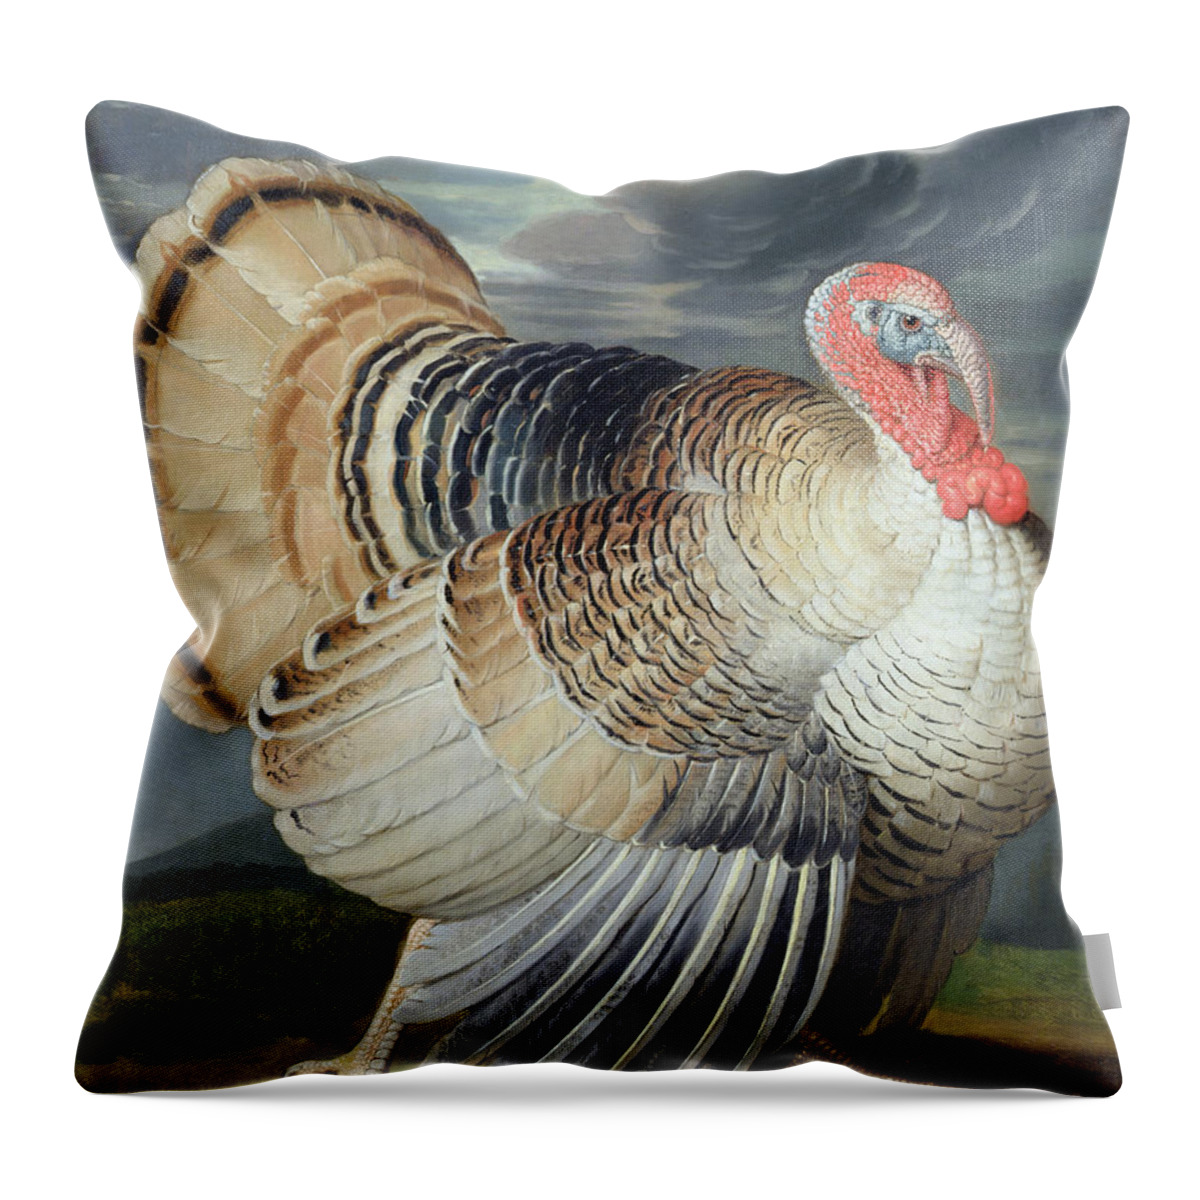 Portrait Throw Pillow featuring the painting Portrait of a Turkey by Johann Wenceslaus Peter Wenzal